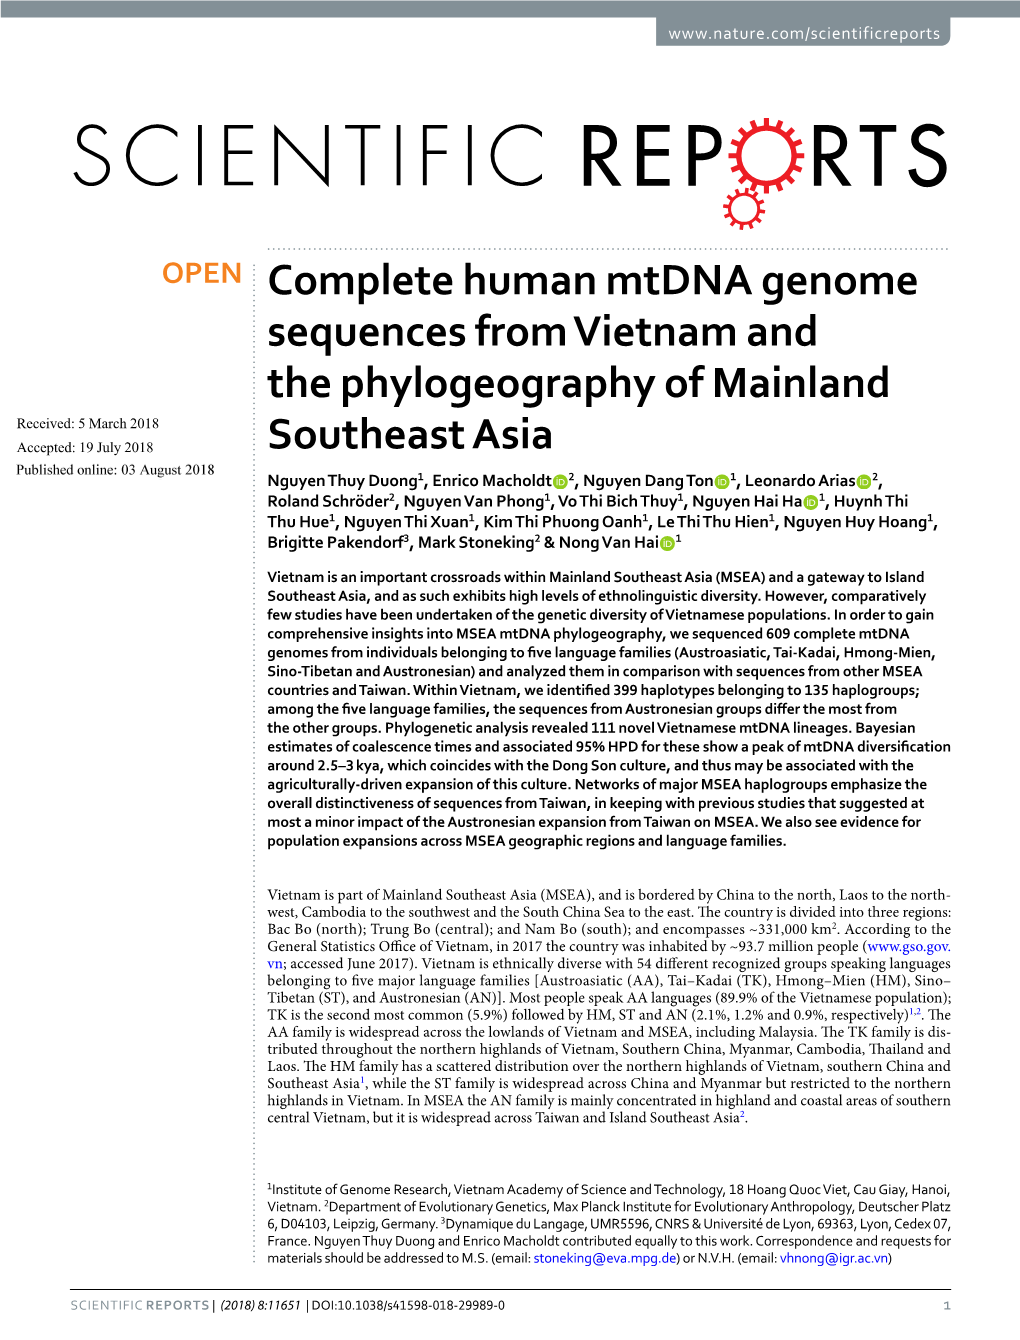 Complete Human Mtdna Genome Sequences from Vietnam and The